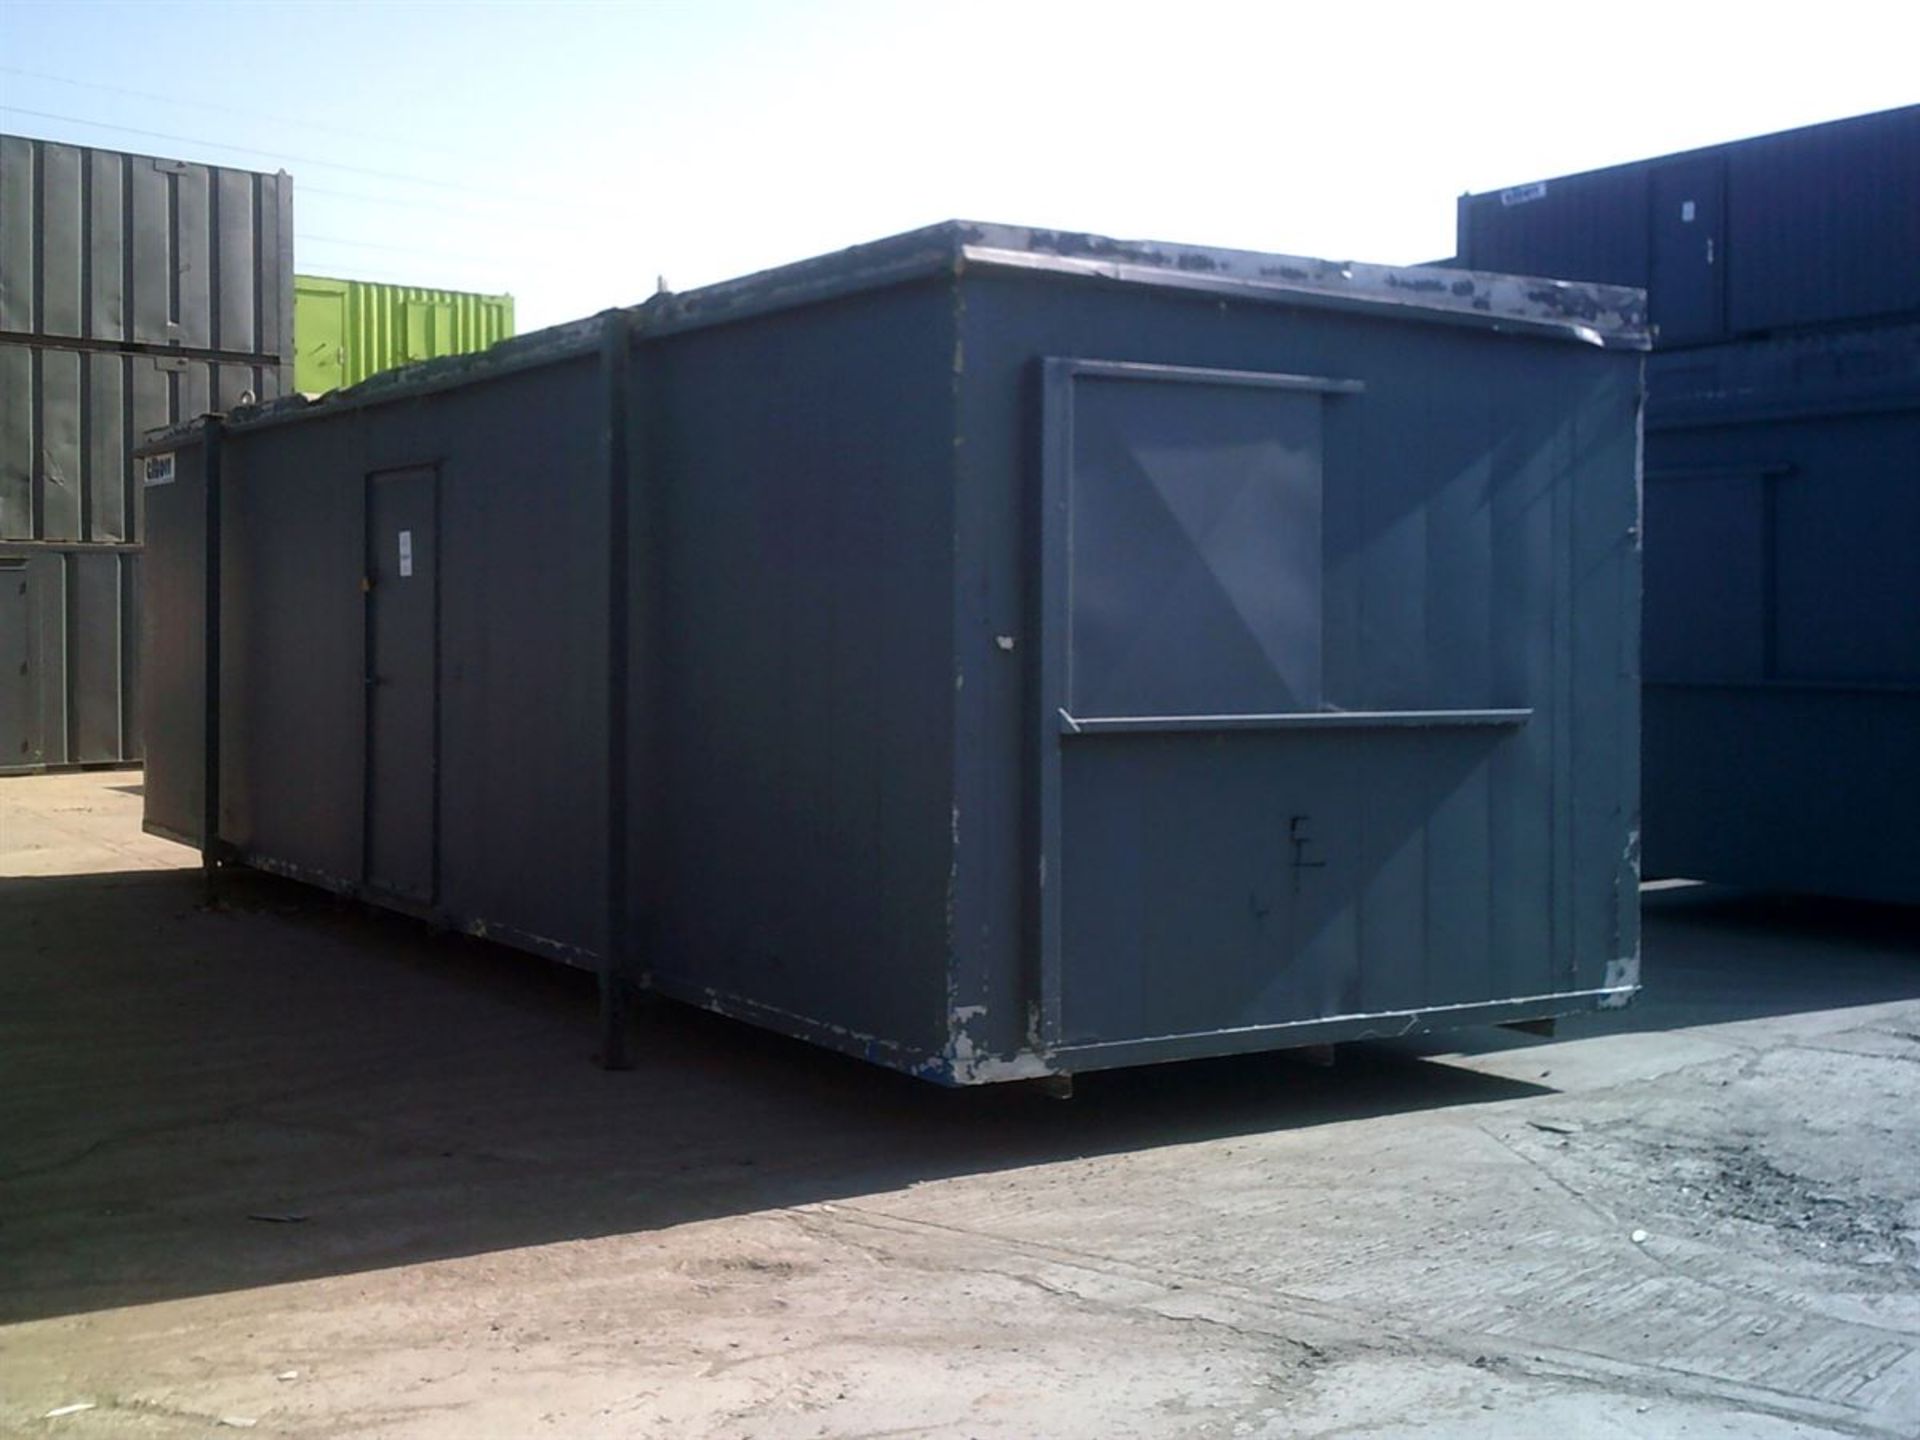 ESP13727 32ft x 10ft Anti-Vandal Canteen/Changing Room - Image 2 of 5